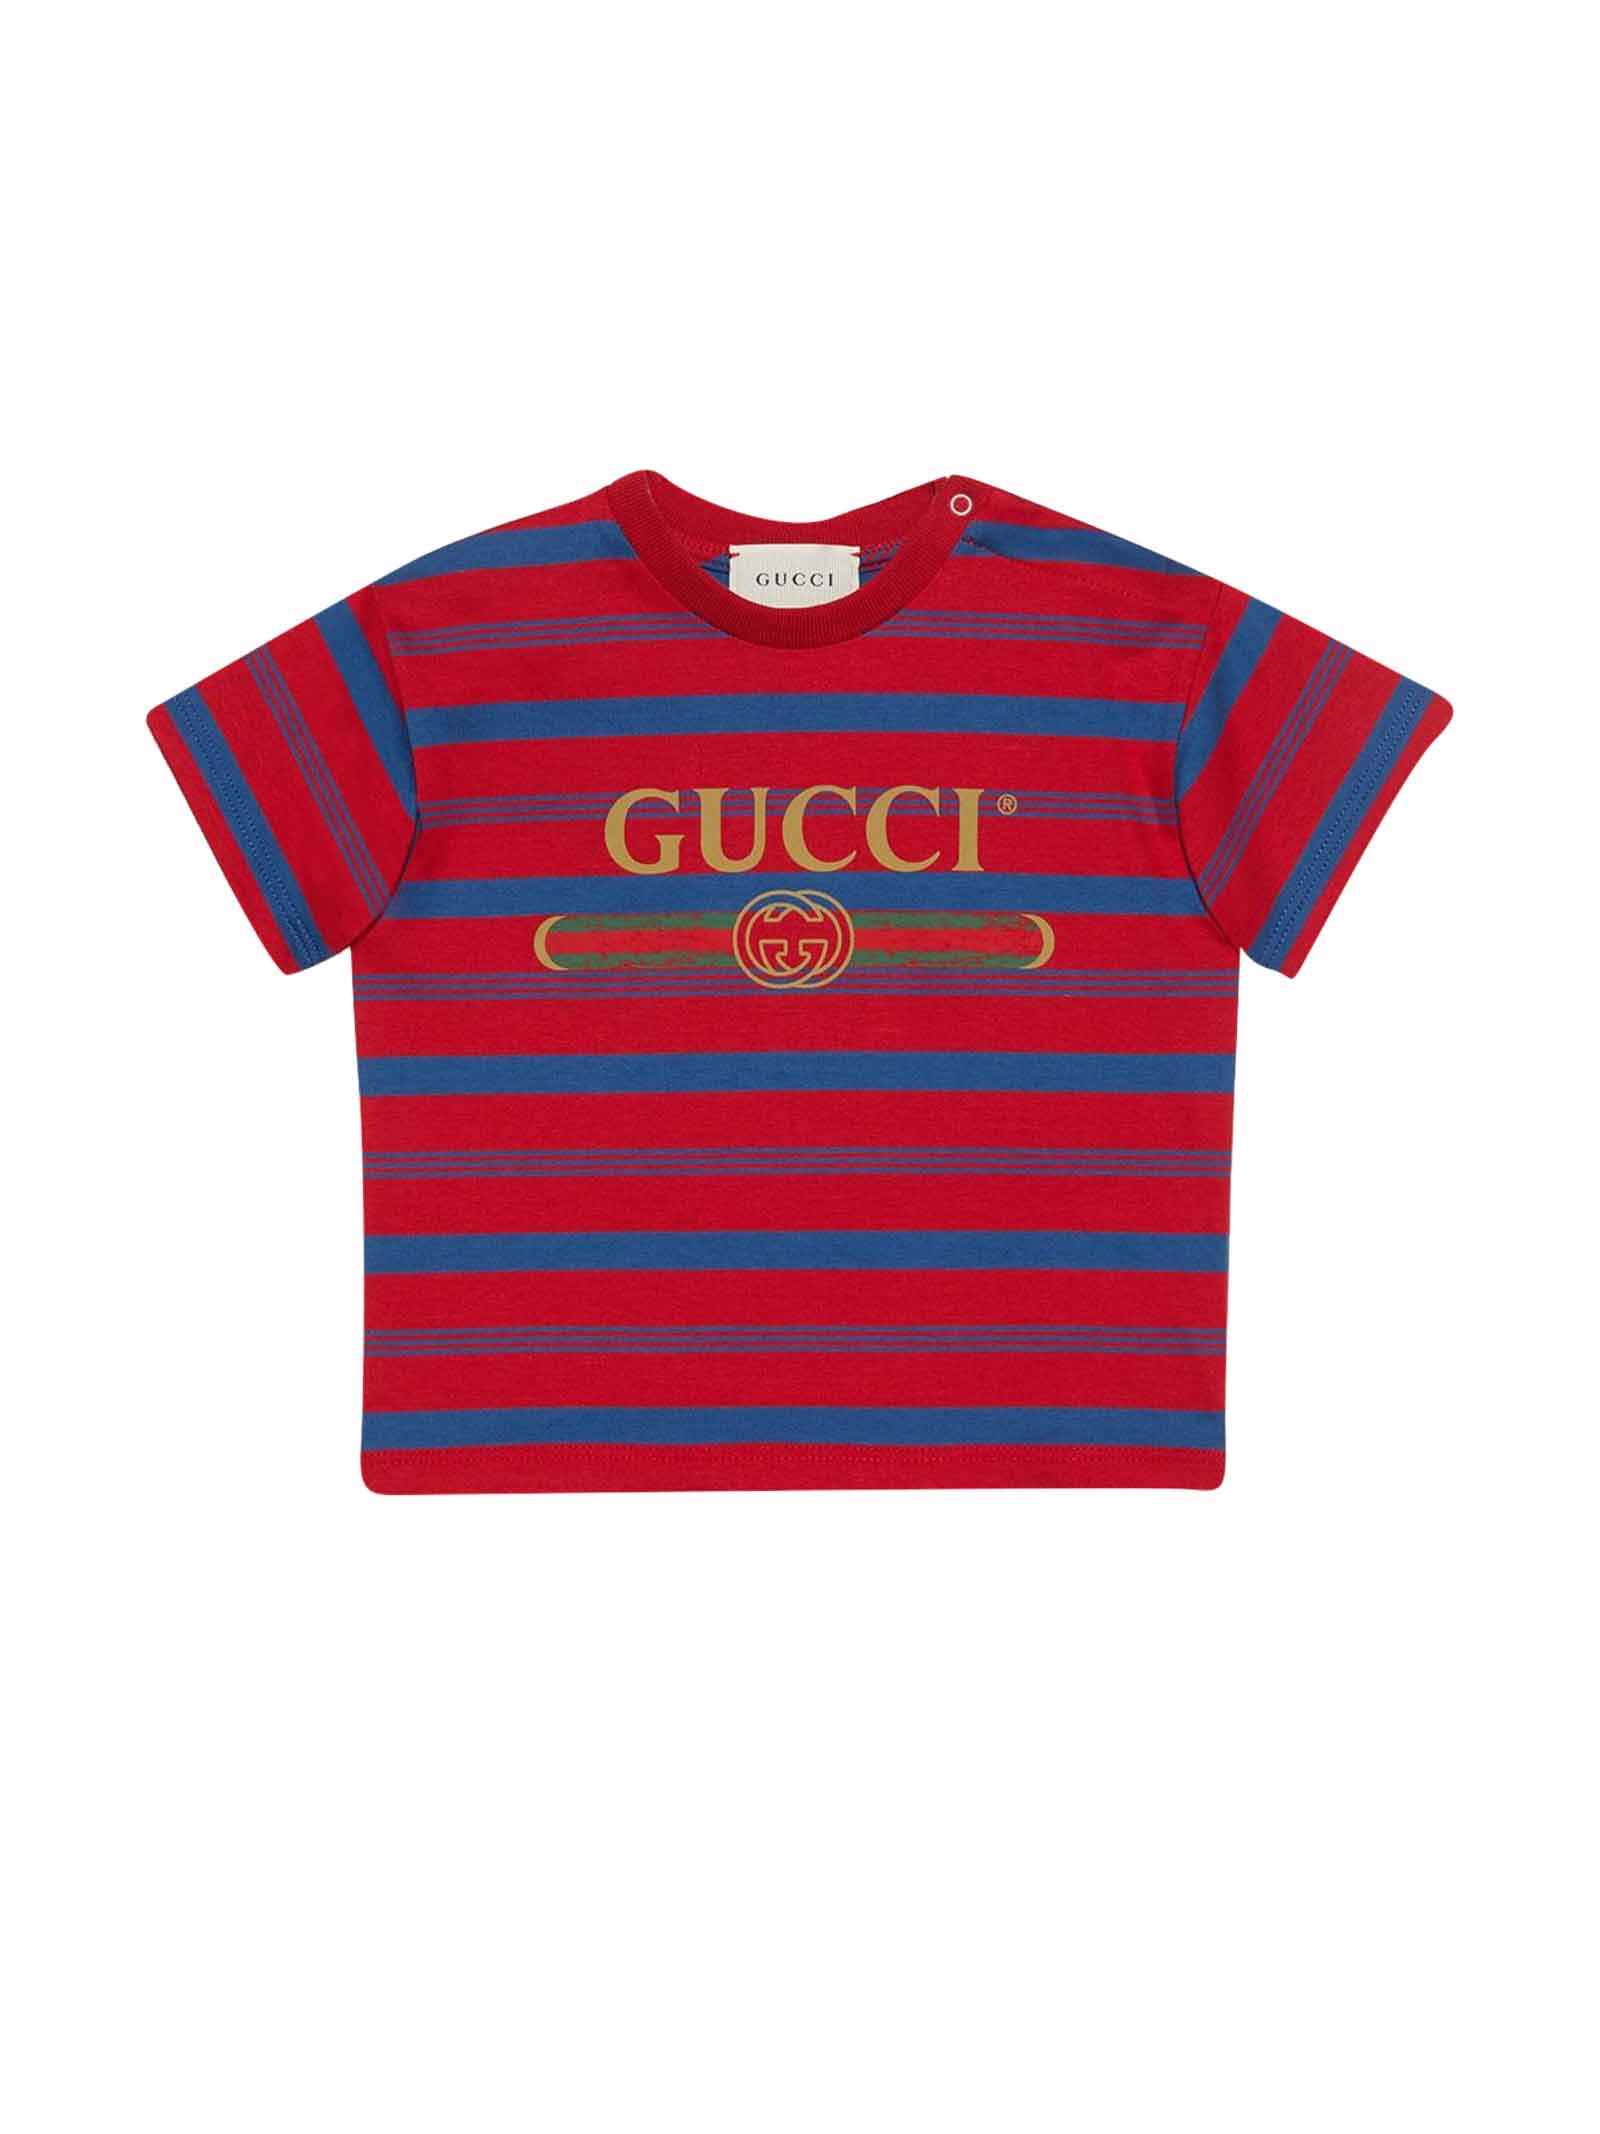 red white and blue gucci shirt